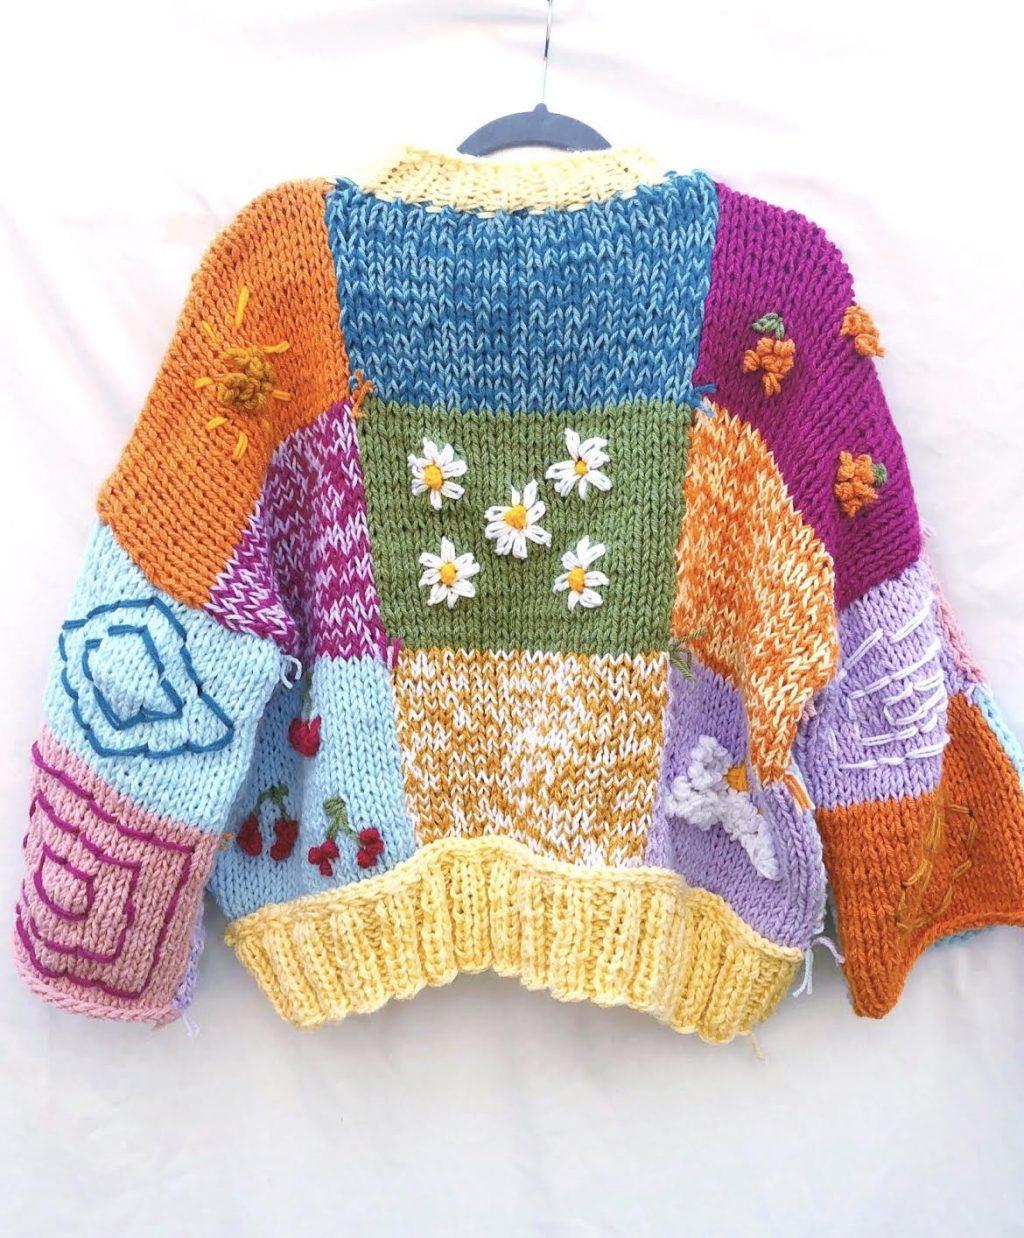 One of Ross' colorful creations hangs in front of a white background. During the extra time Ross had in quarantine, she knitted and designed many sweaters that incorporated bright colors and patterns for a young, fun look. Photo courtesy of Kendall Ross